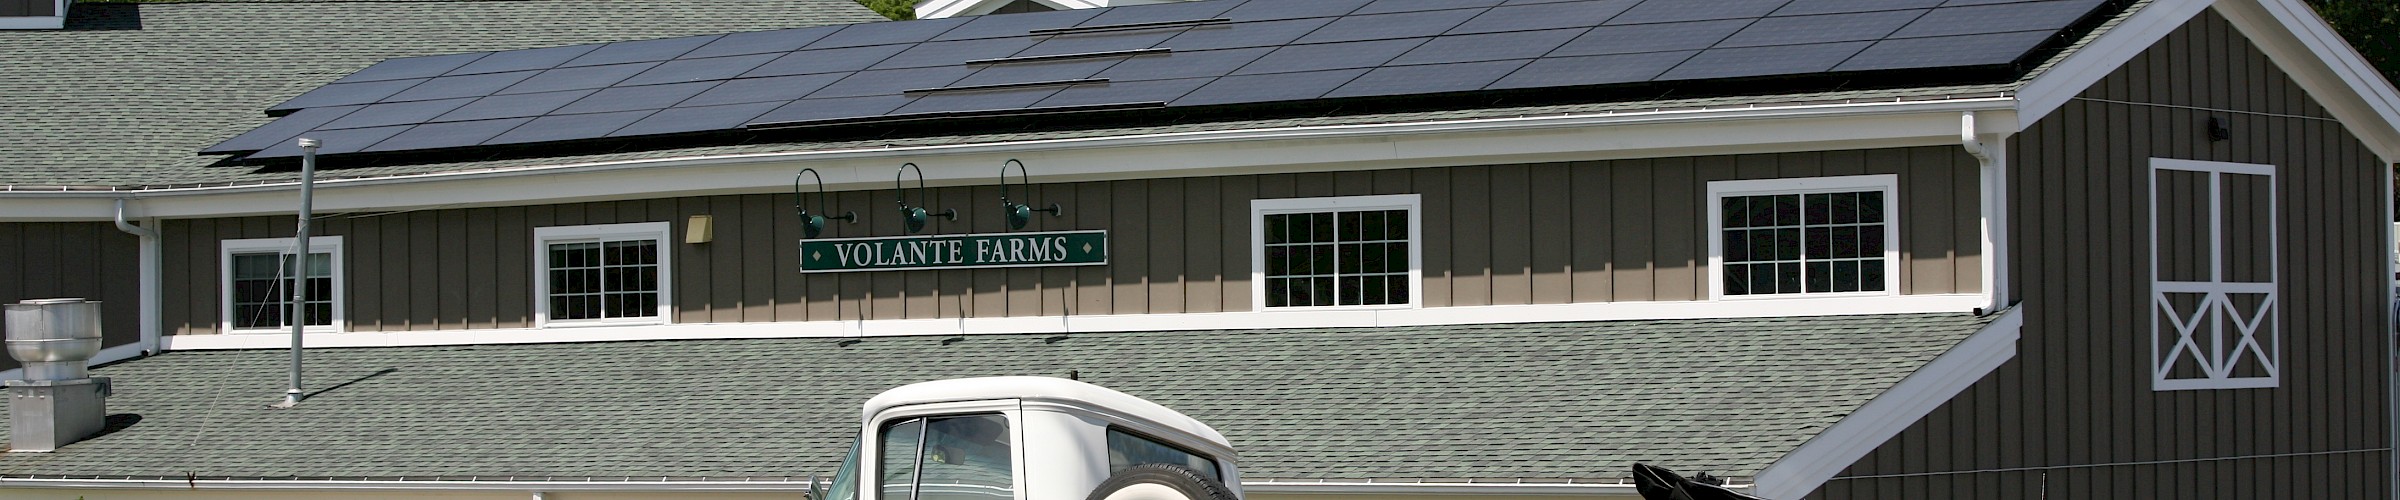 37.76 kW Commercial Install on Volante Farms